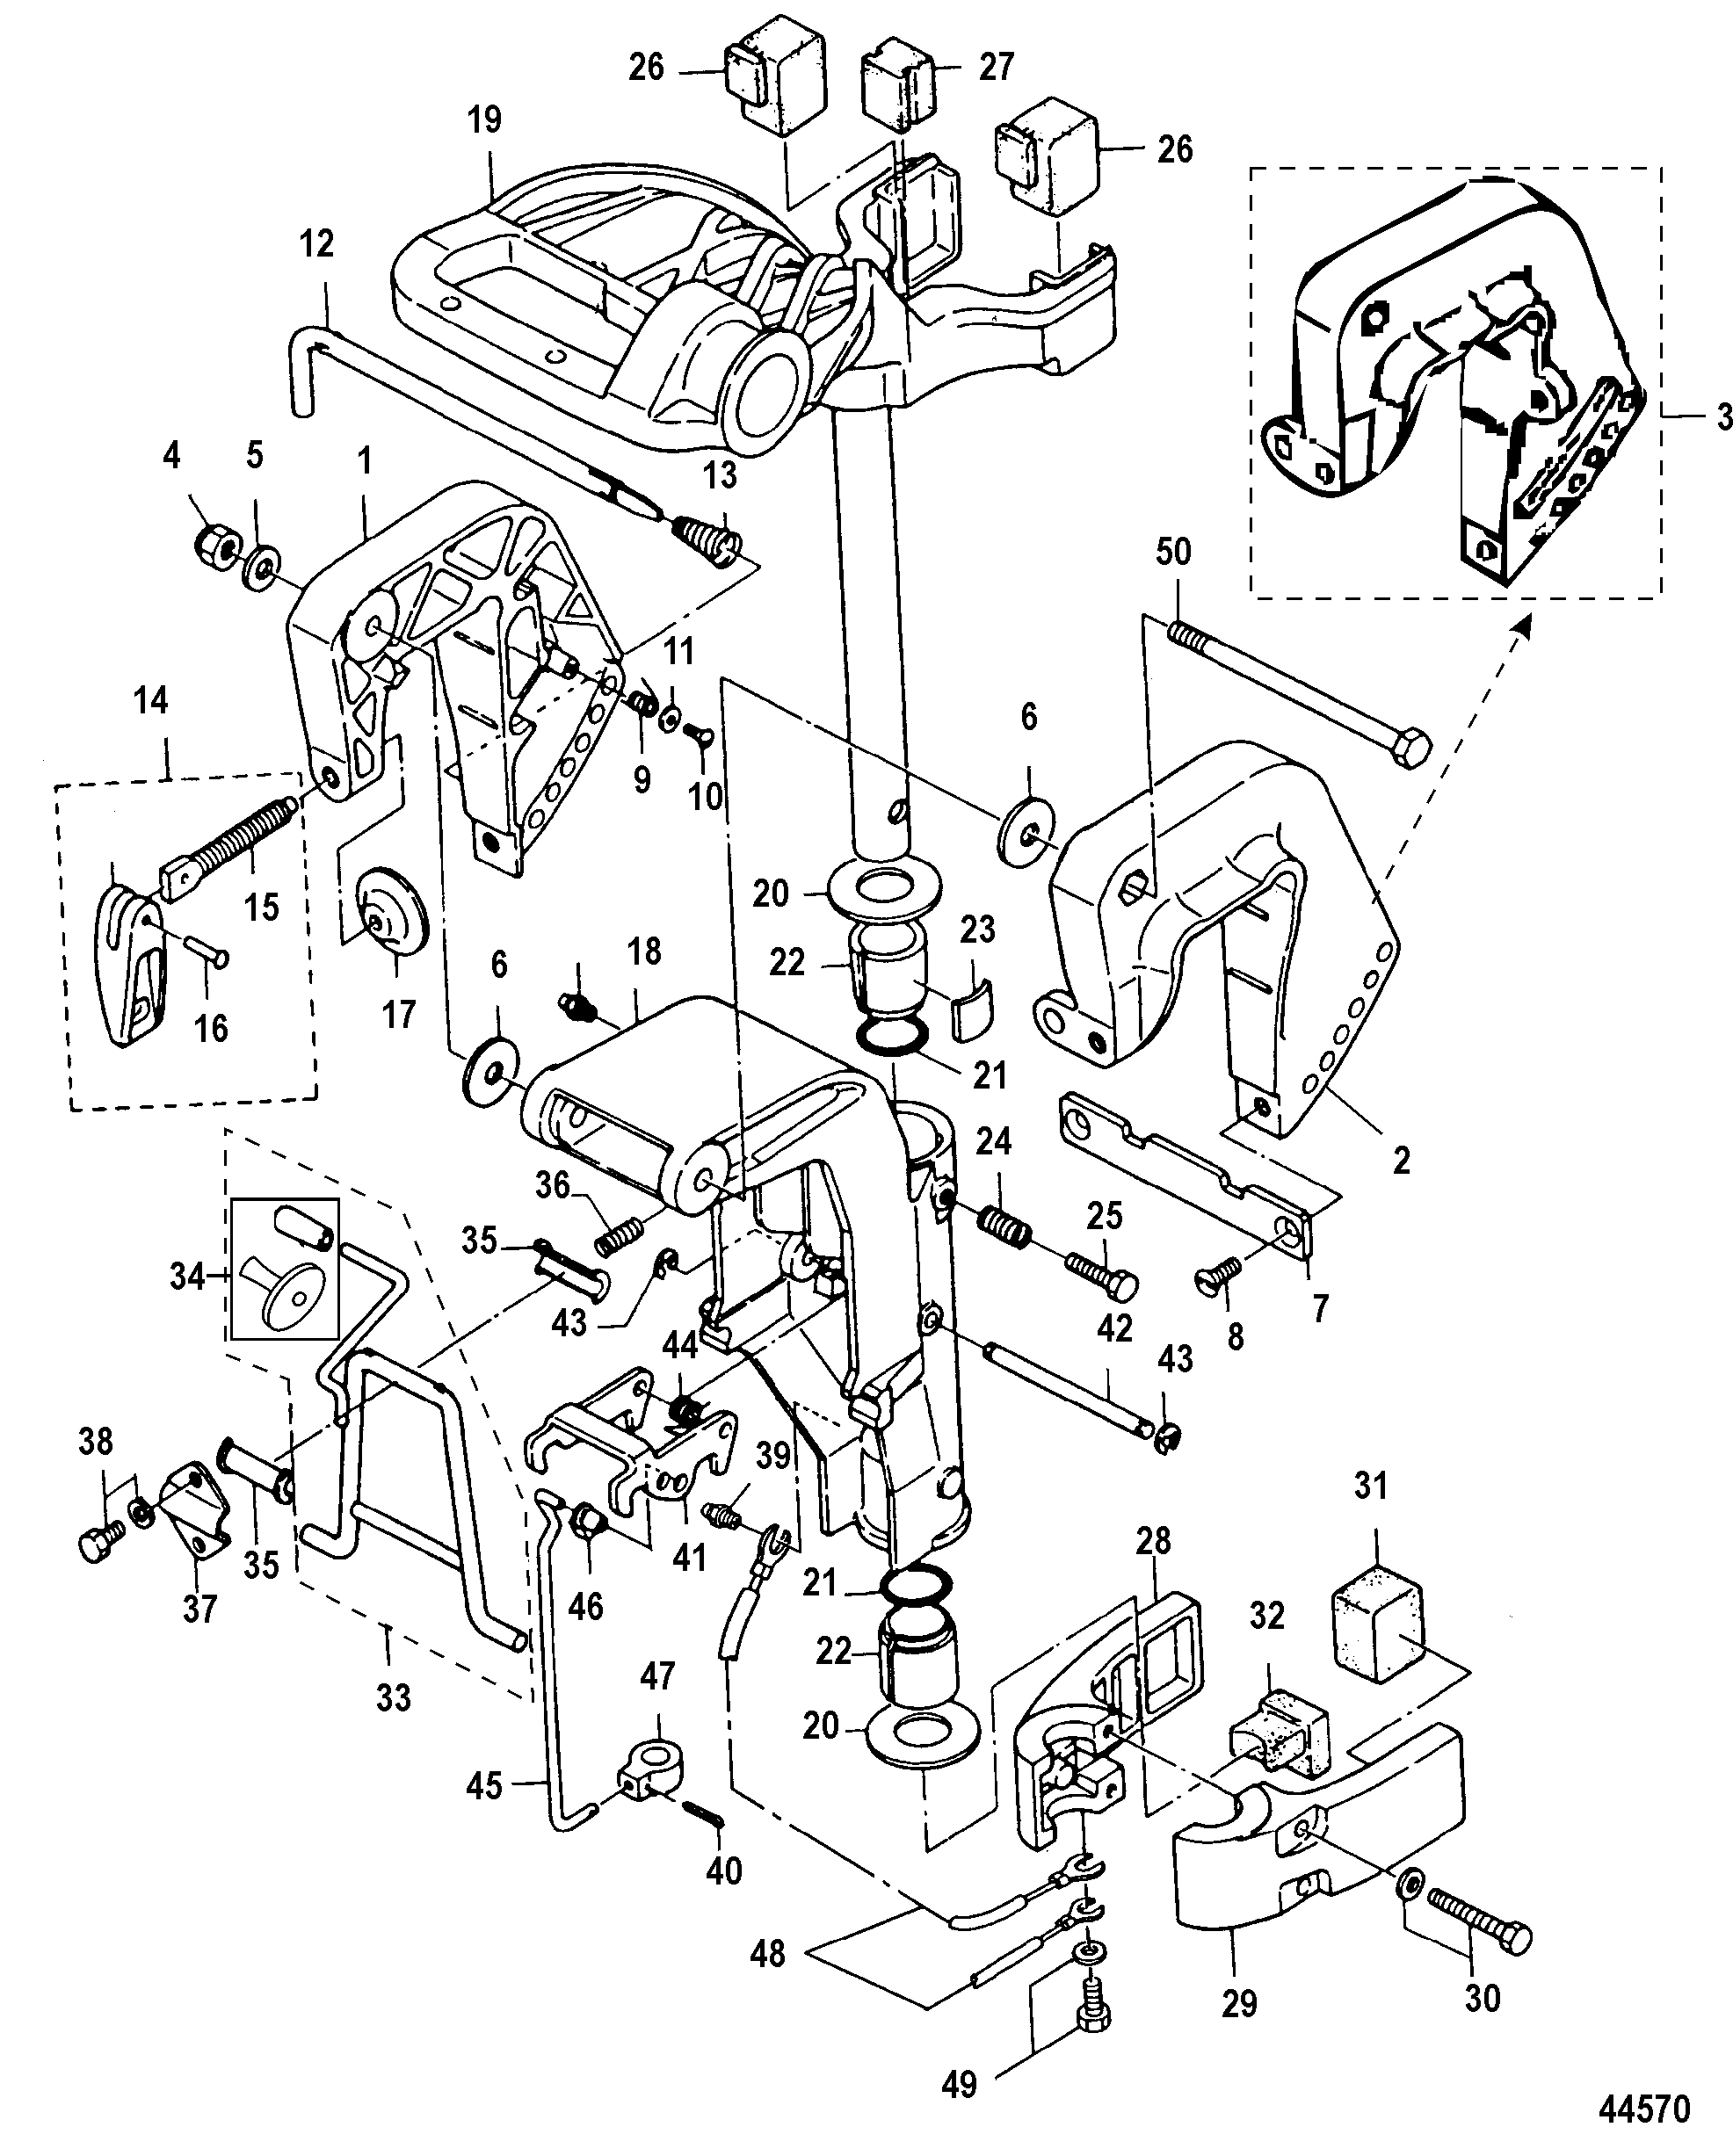 Clamp and Swivel Brackets